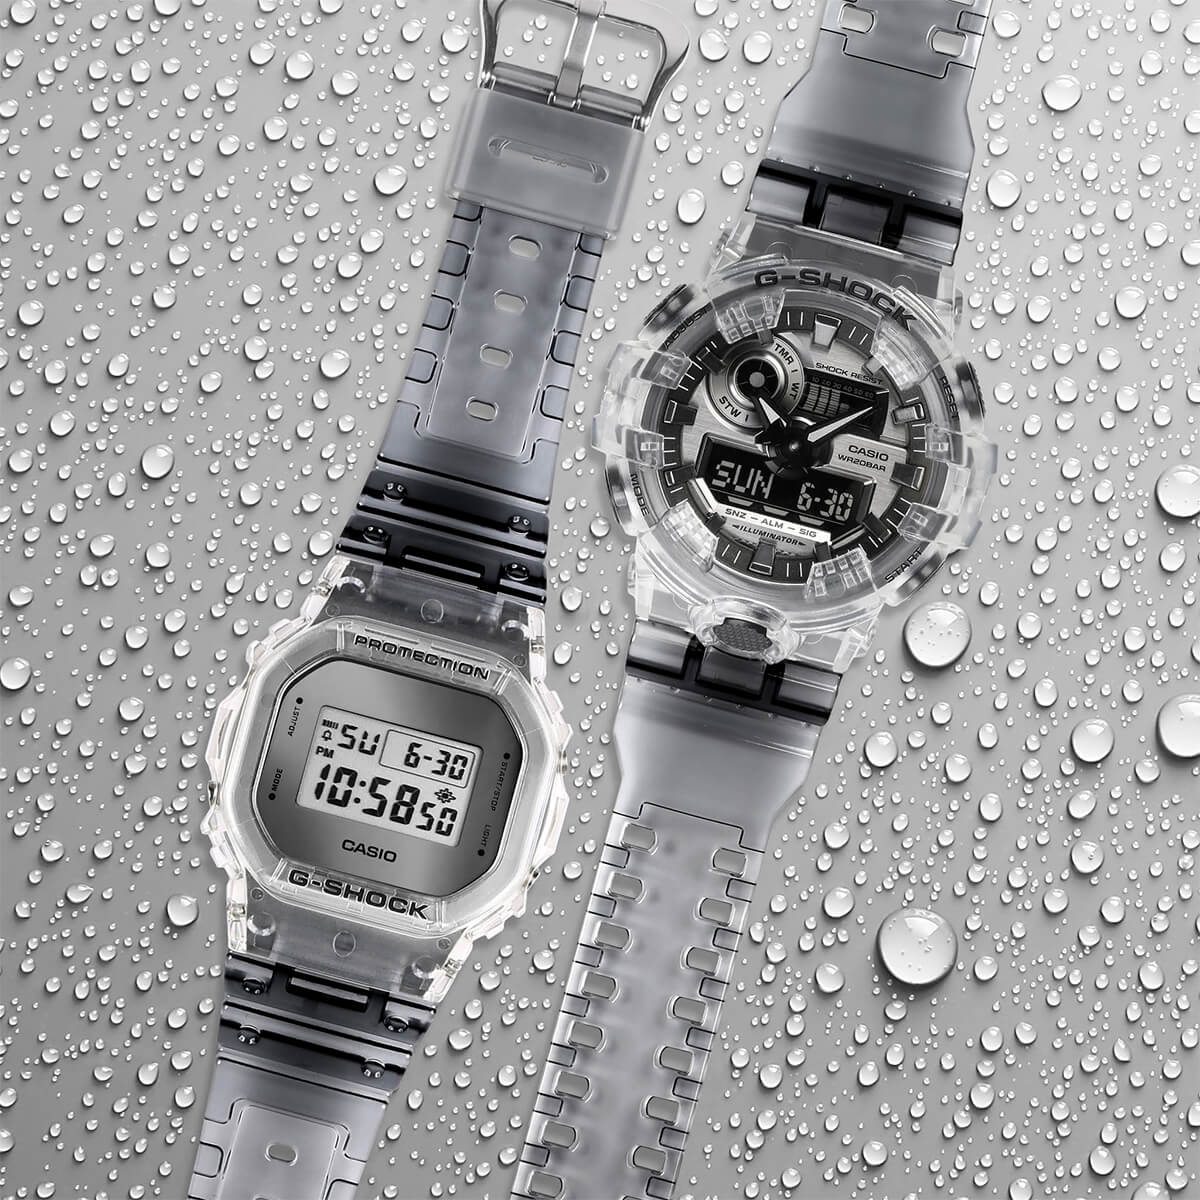 G-SHOCK WATCHES FEATURING NEW STYLES - SHOP NOW